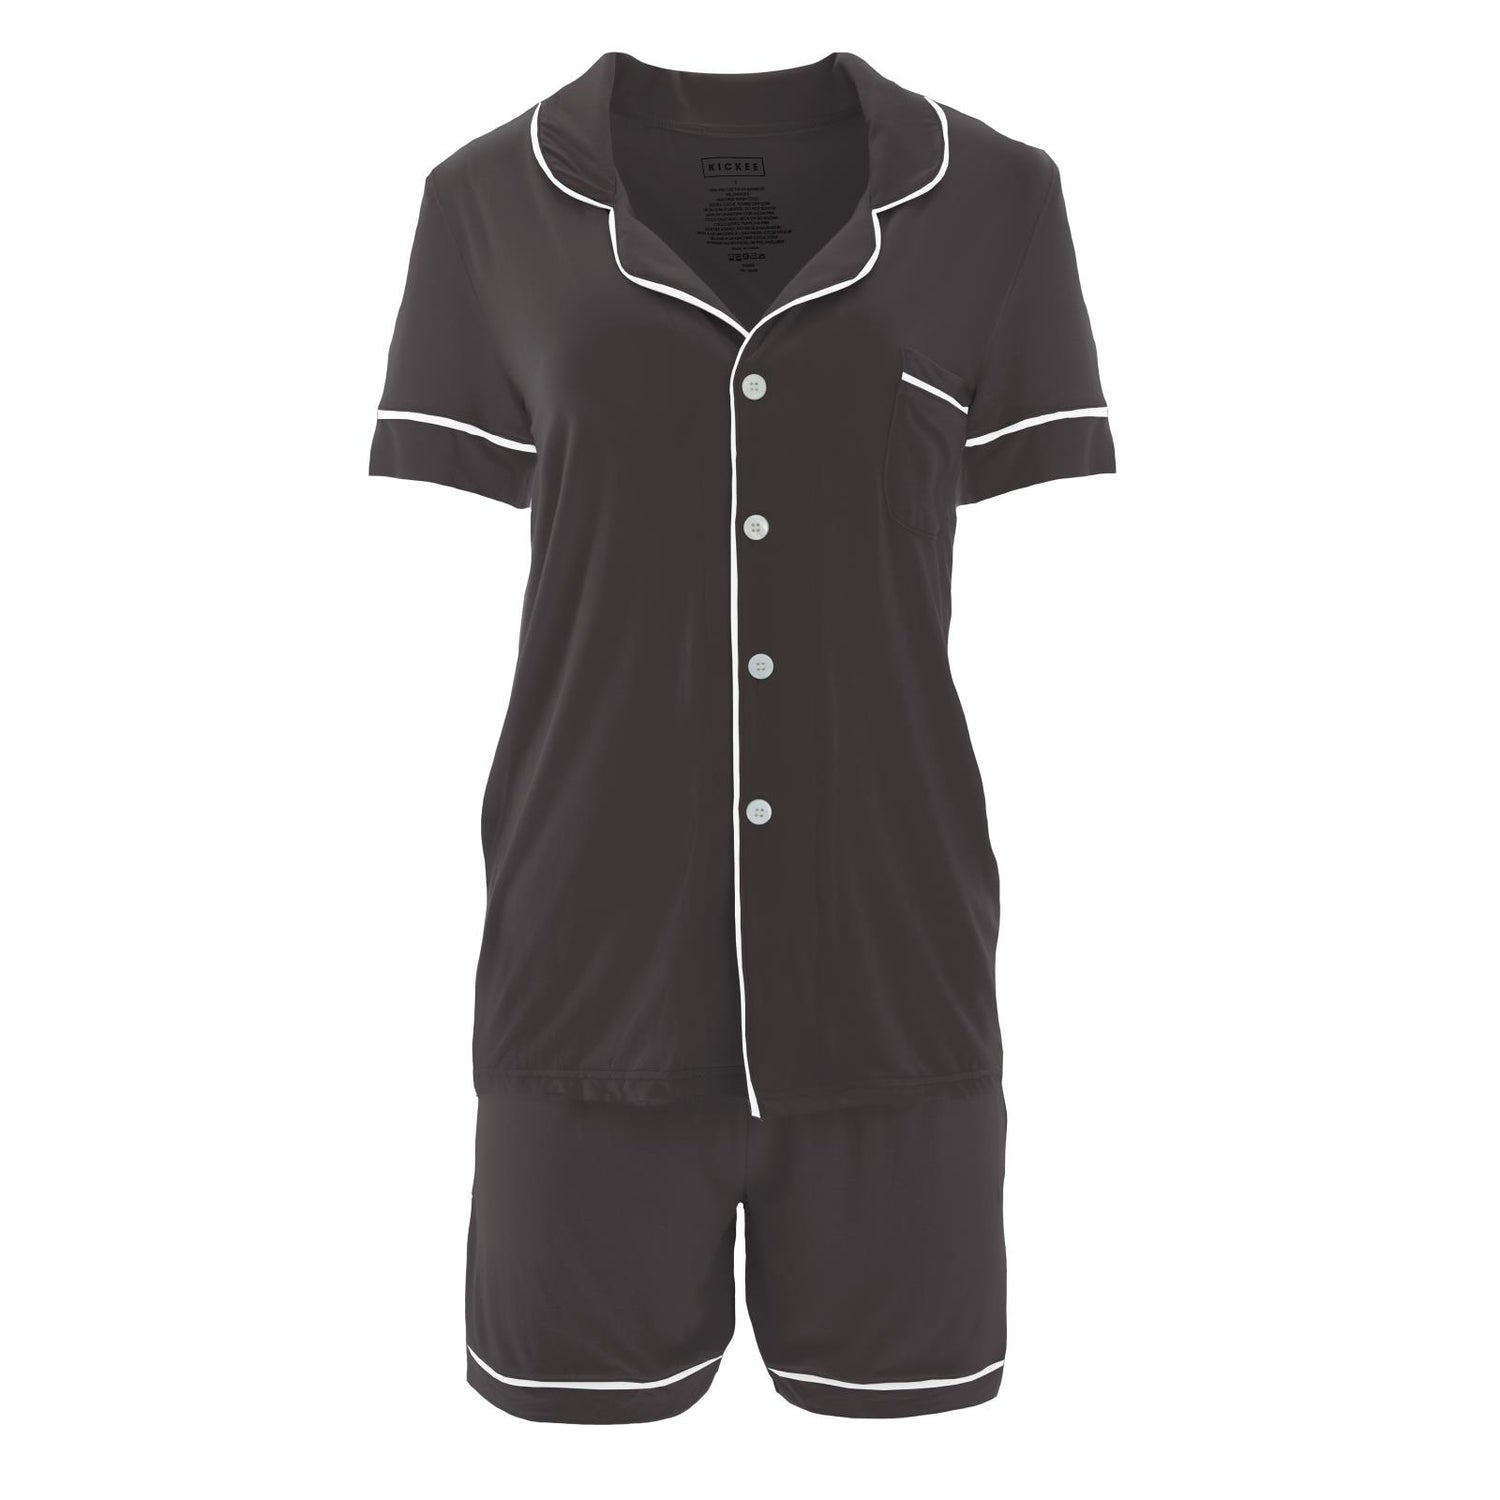 Women's Solid Short Sleeve Collared Pajama Set with Shorts in Midnight with Natural